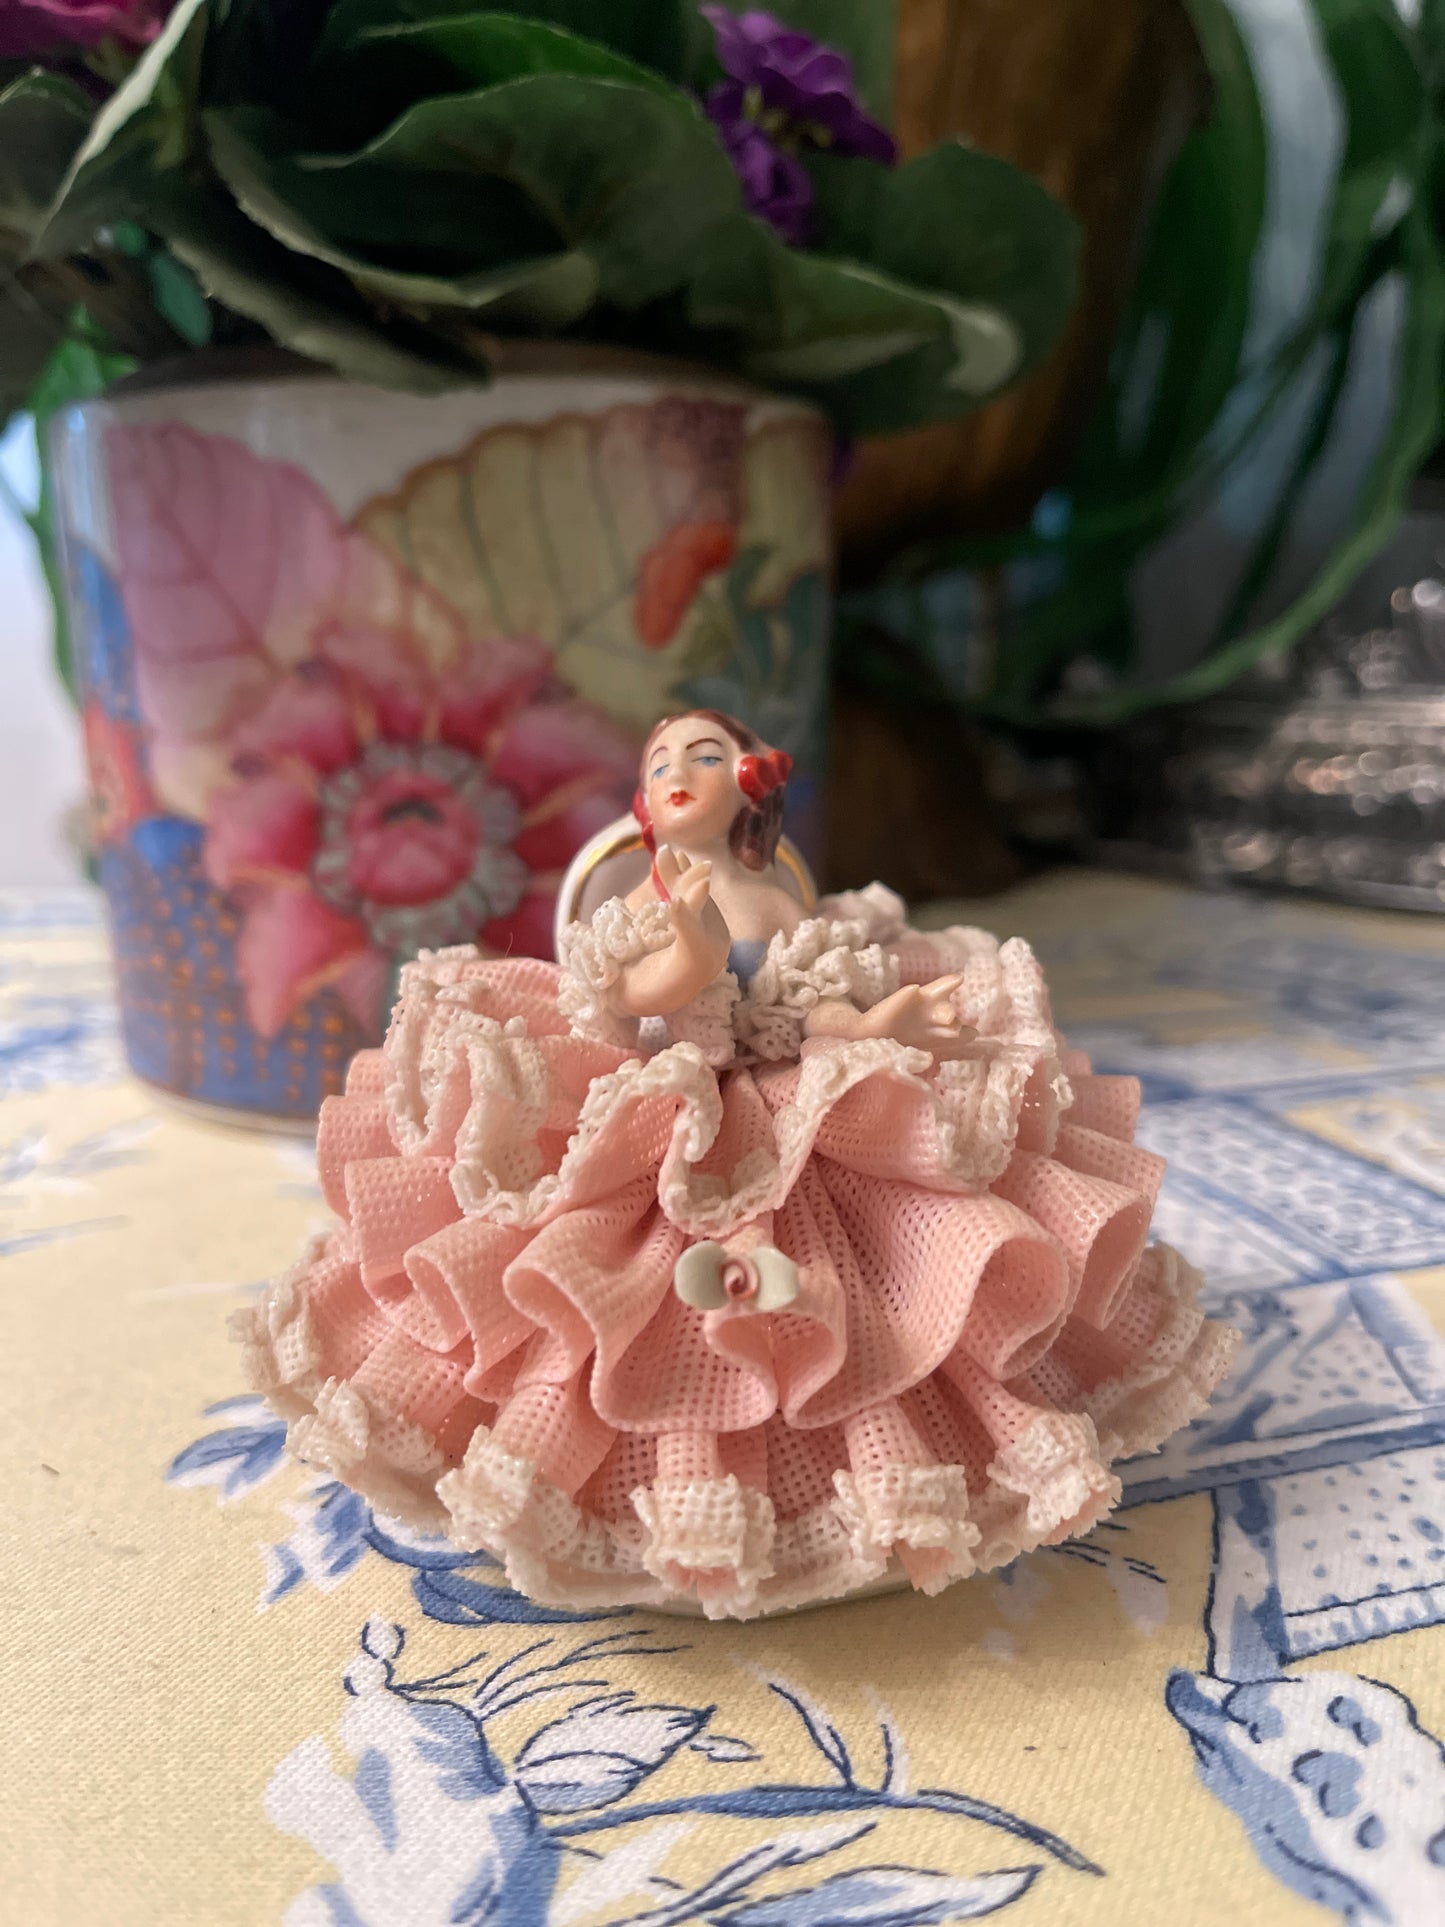 Dresden Figurine Dressed in Pink and White, Vintage Shelf Decor